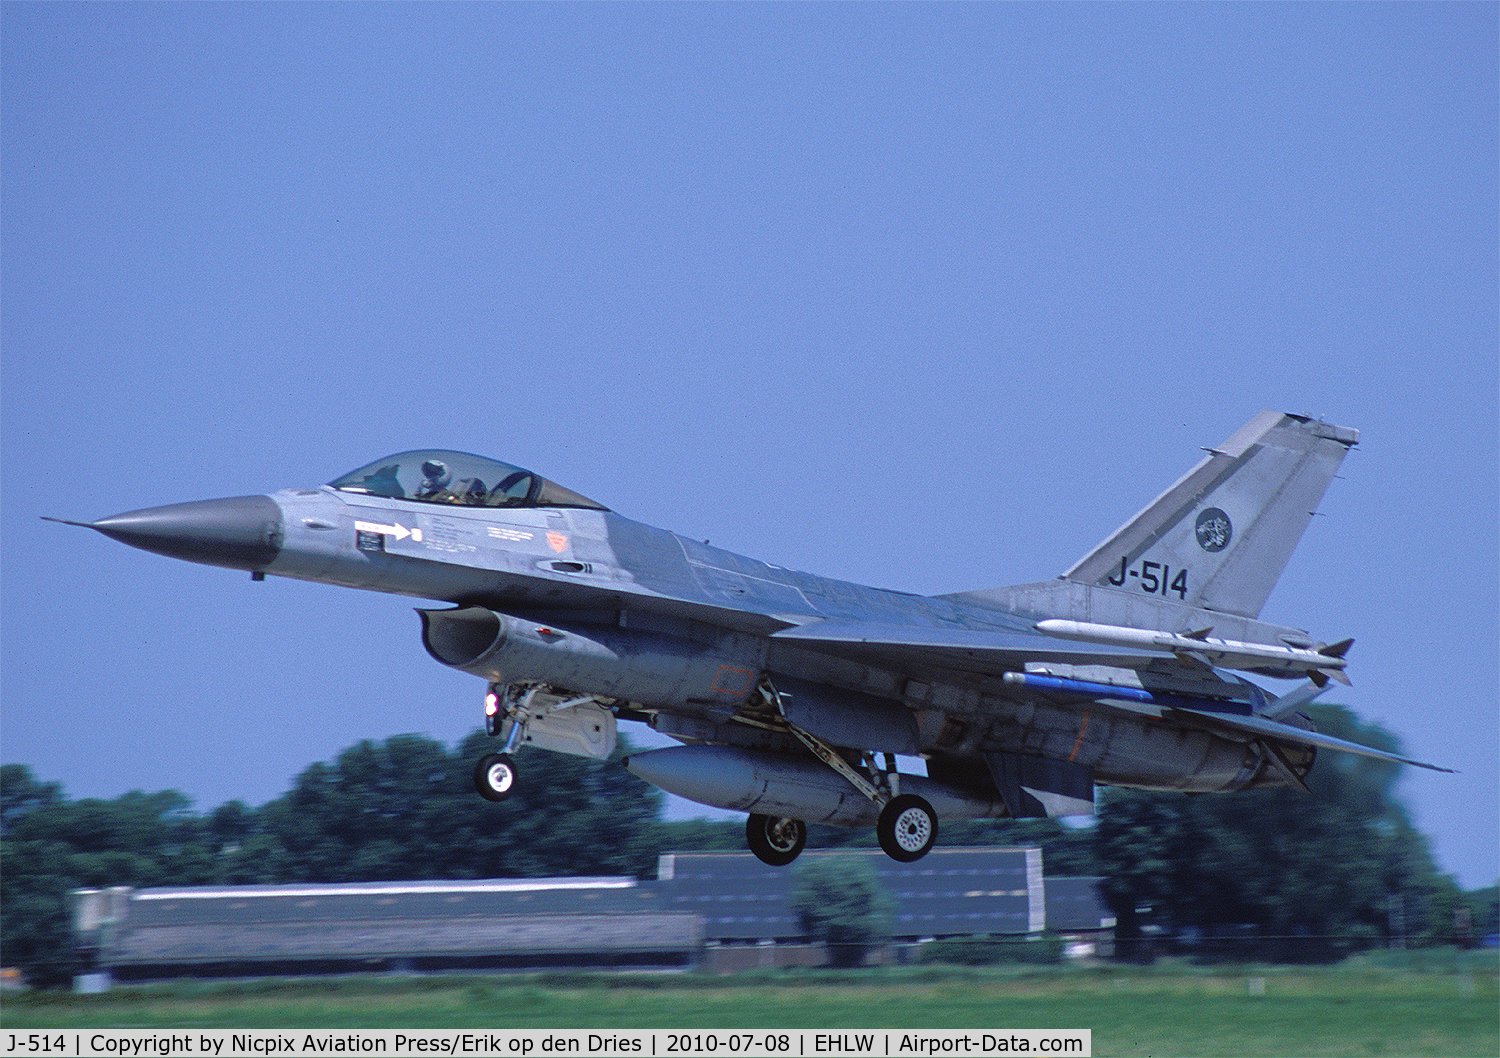 J-514, 1989 Fokker F-16A Fighting Falcon C/N 6D-153, J-514 seen here on landing approach for Leeuwarden AB during the FWIT-2010 course.